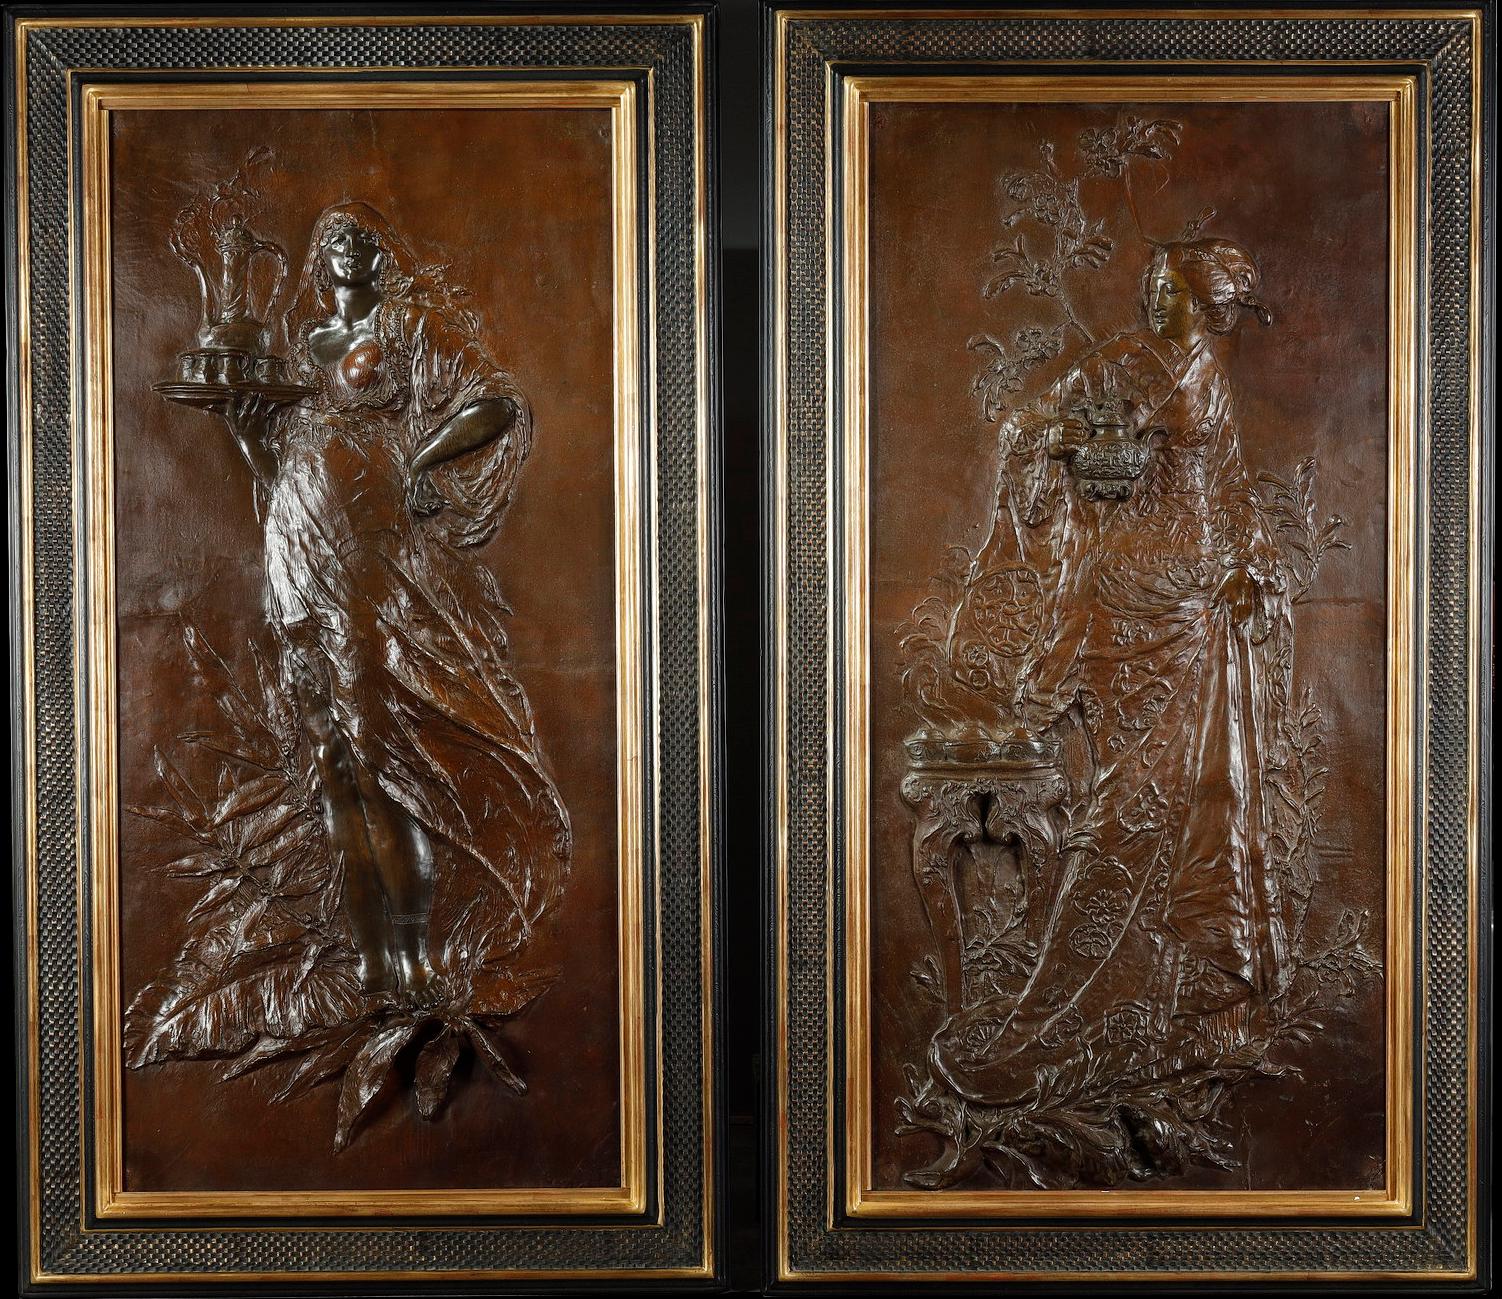 Important pair of metal with double patina plaques representing an Oriental woman and a Japanese woman, both dressed in traditional outfits, during the tea ceremony. Each is presented in a black and gold painted wooden frame.

Louis Hottot